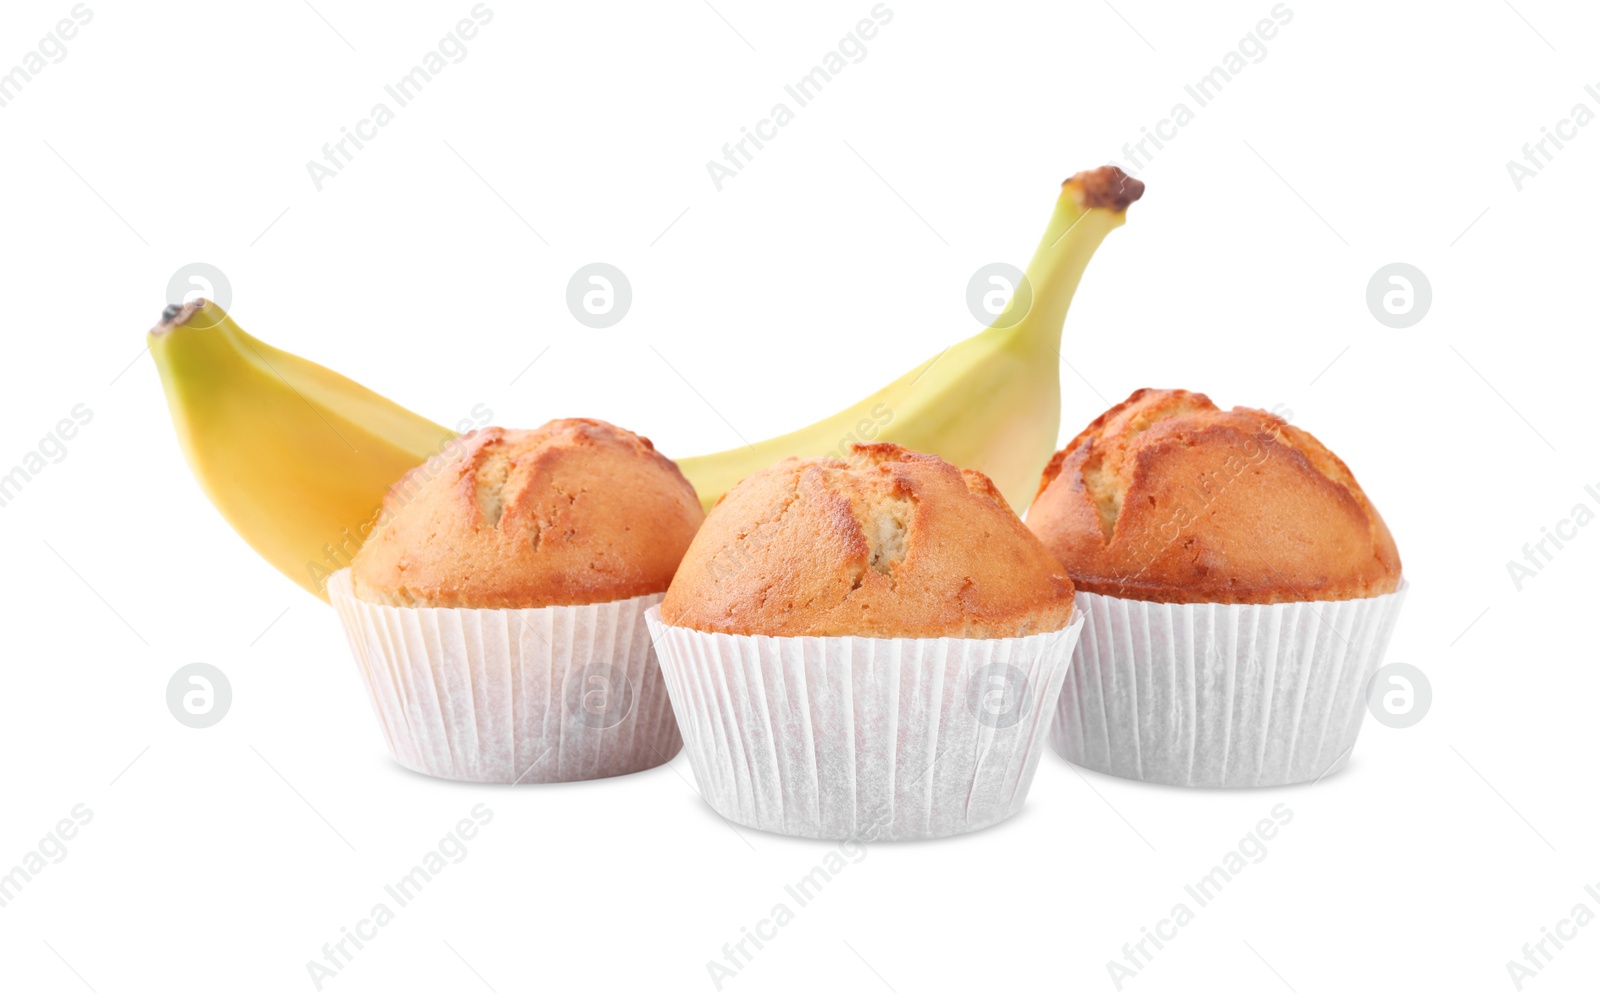 Photo of Tasty muffins and ripe banana on white background